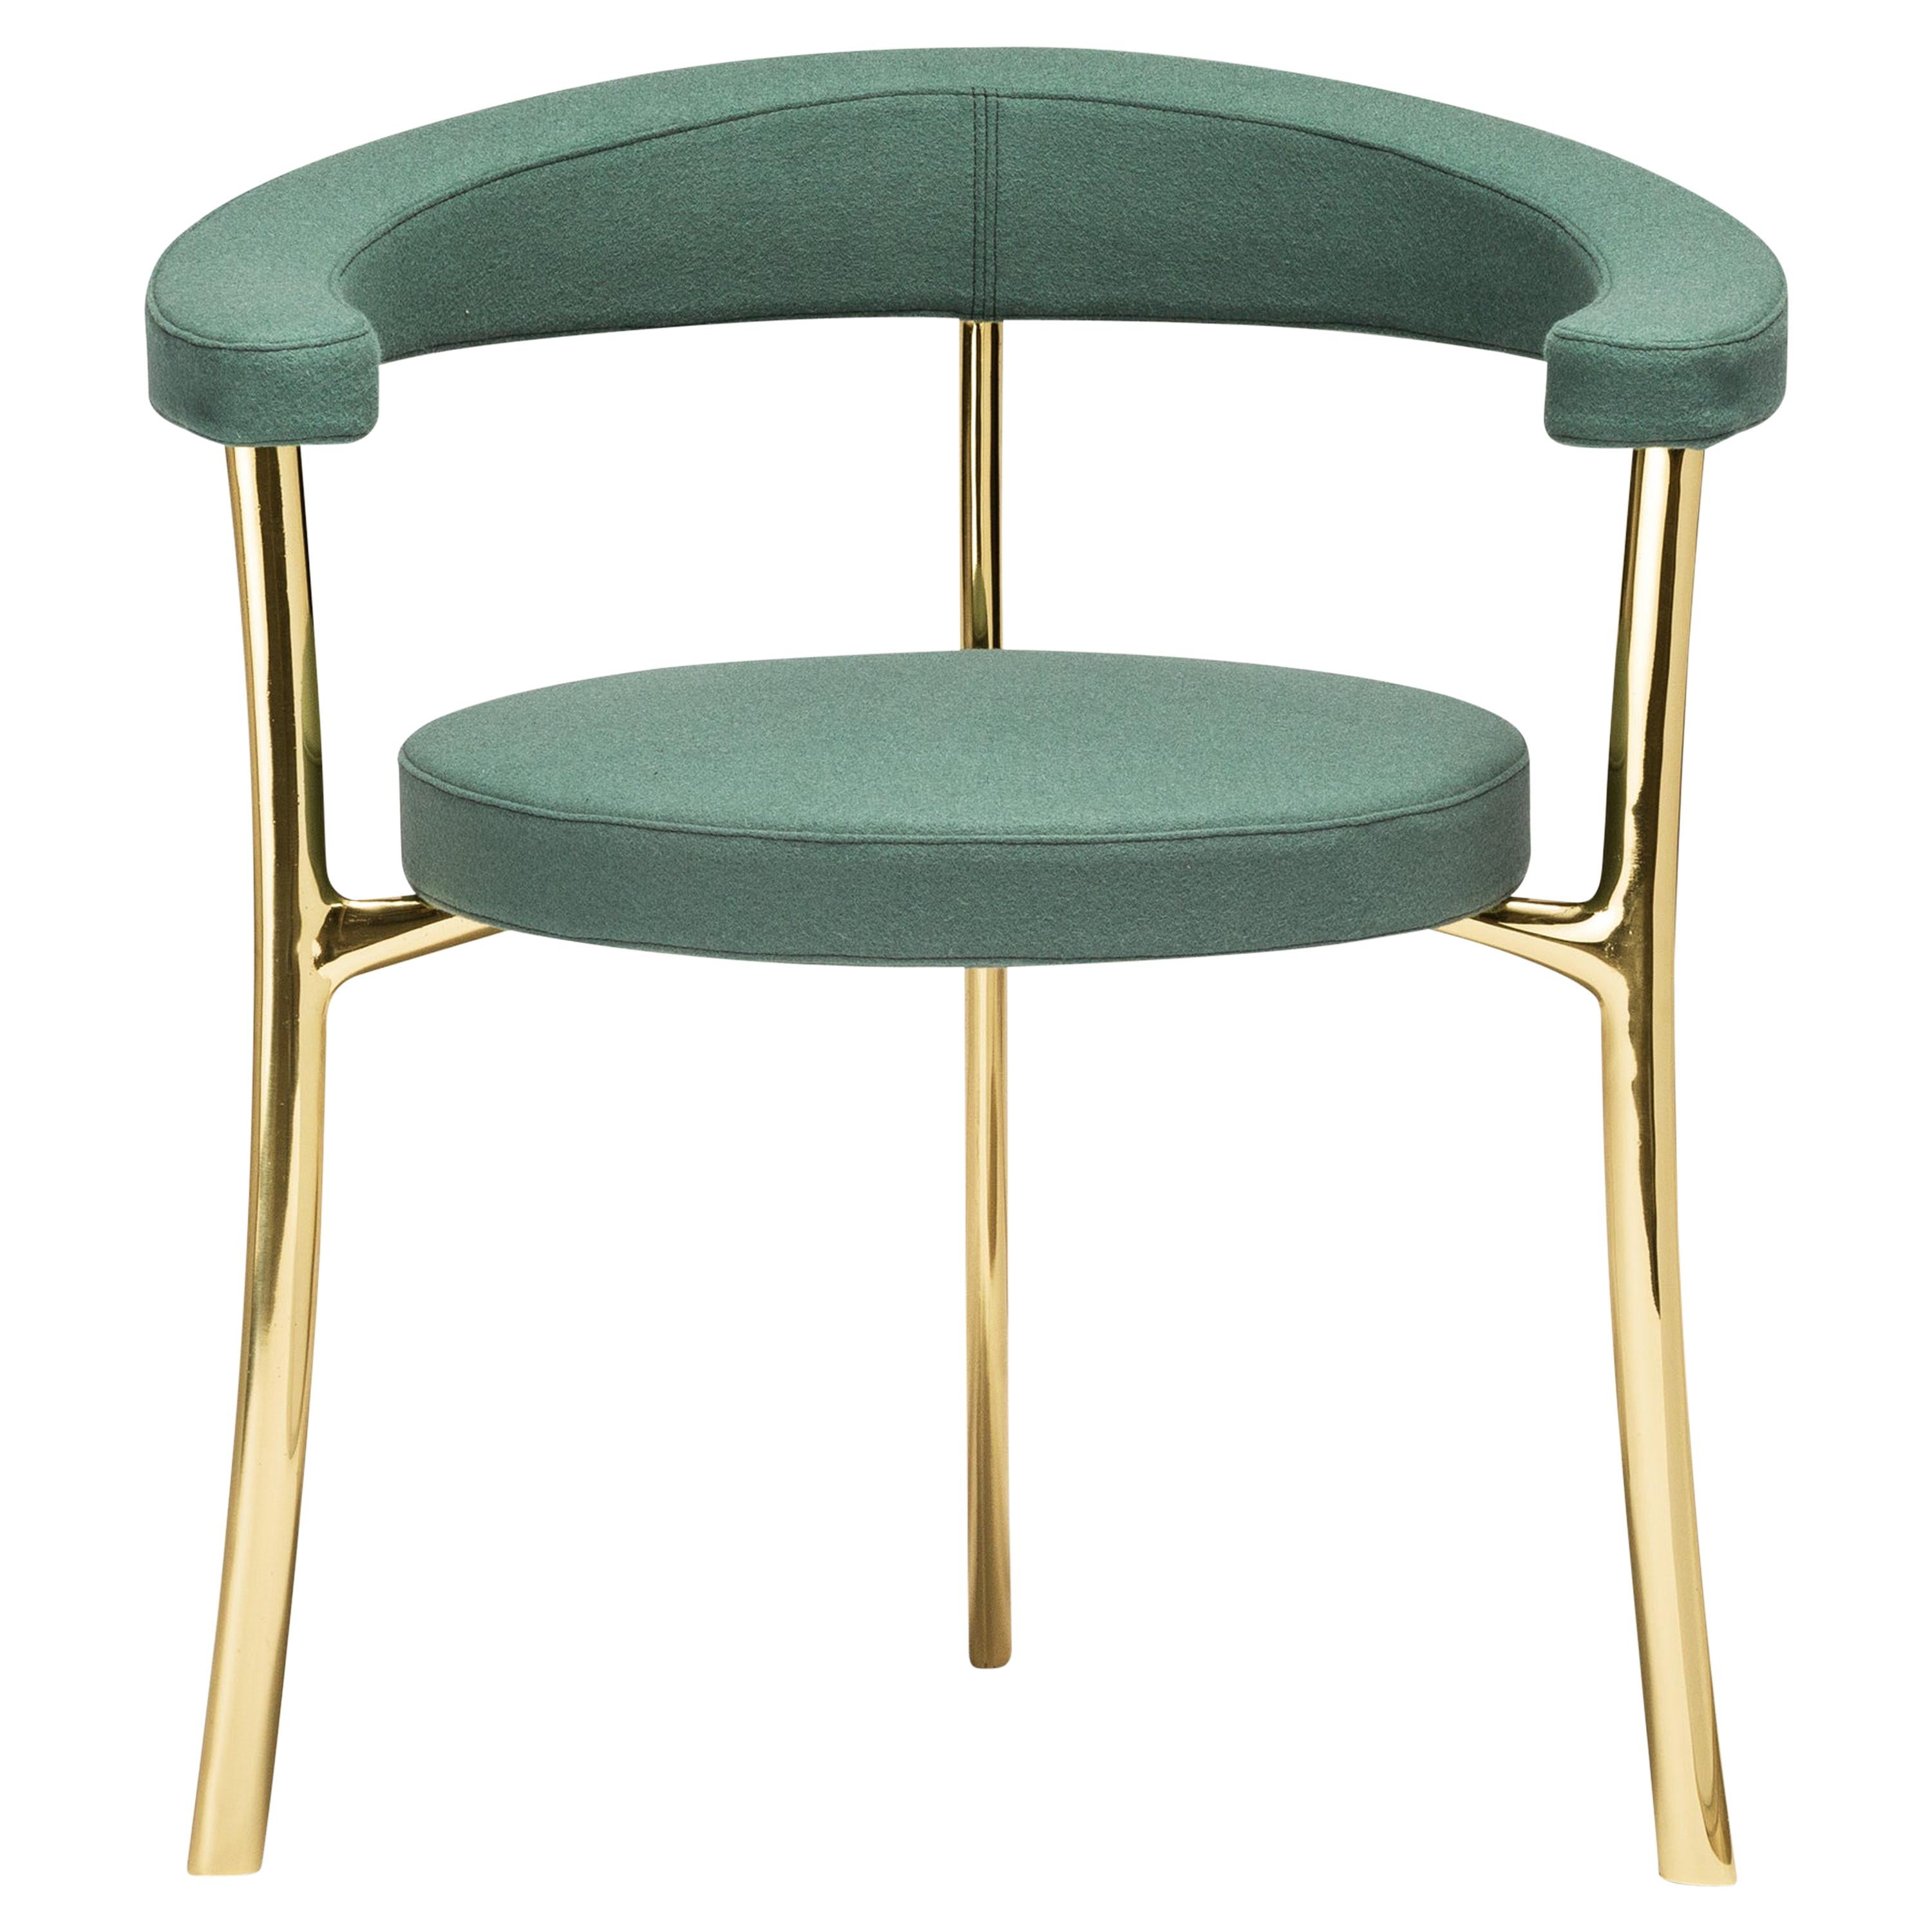 For Sale: Green (f-1241-c0931) Ghidini1961 Katana Armchair in Fabric with Polished Brass Legs by Paolo Rizzatto